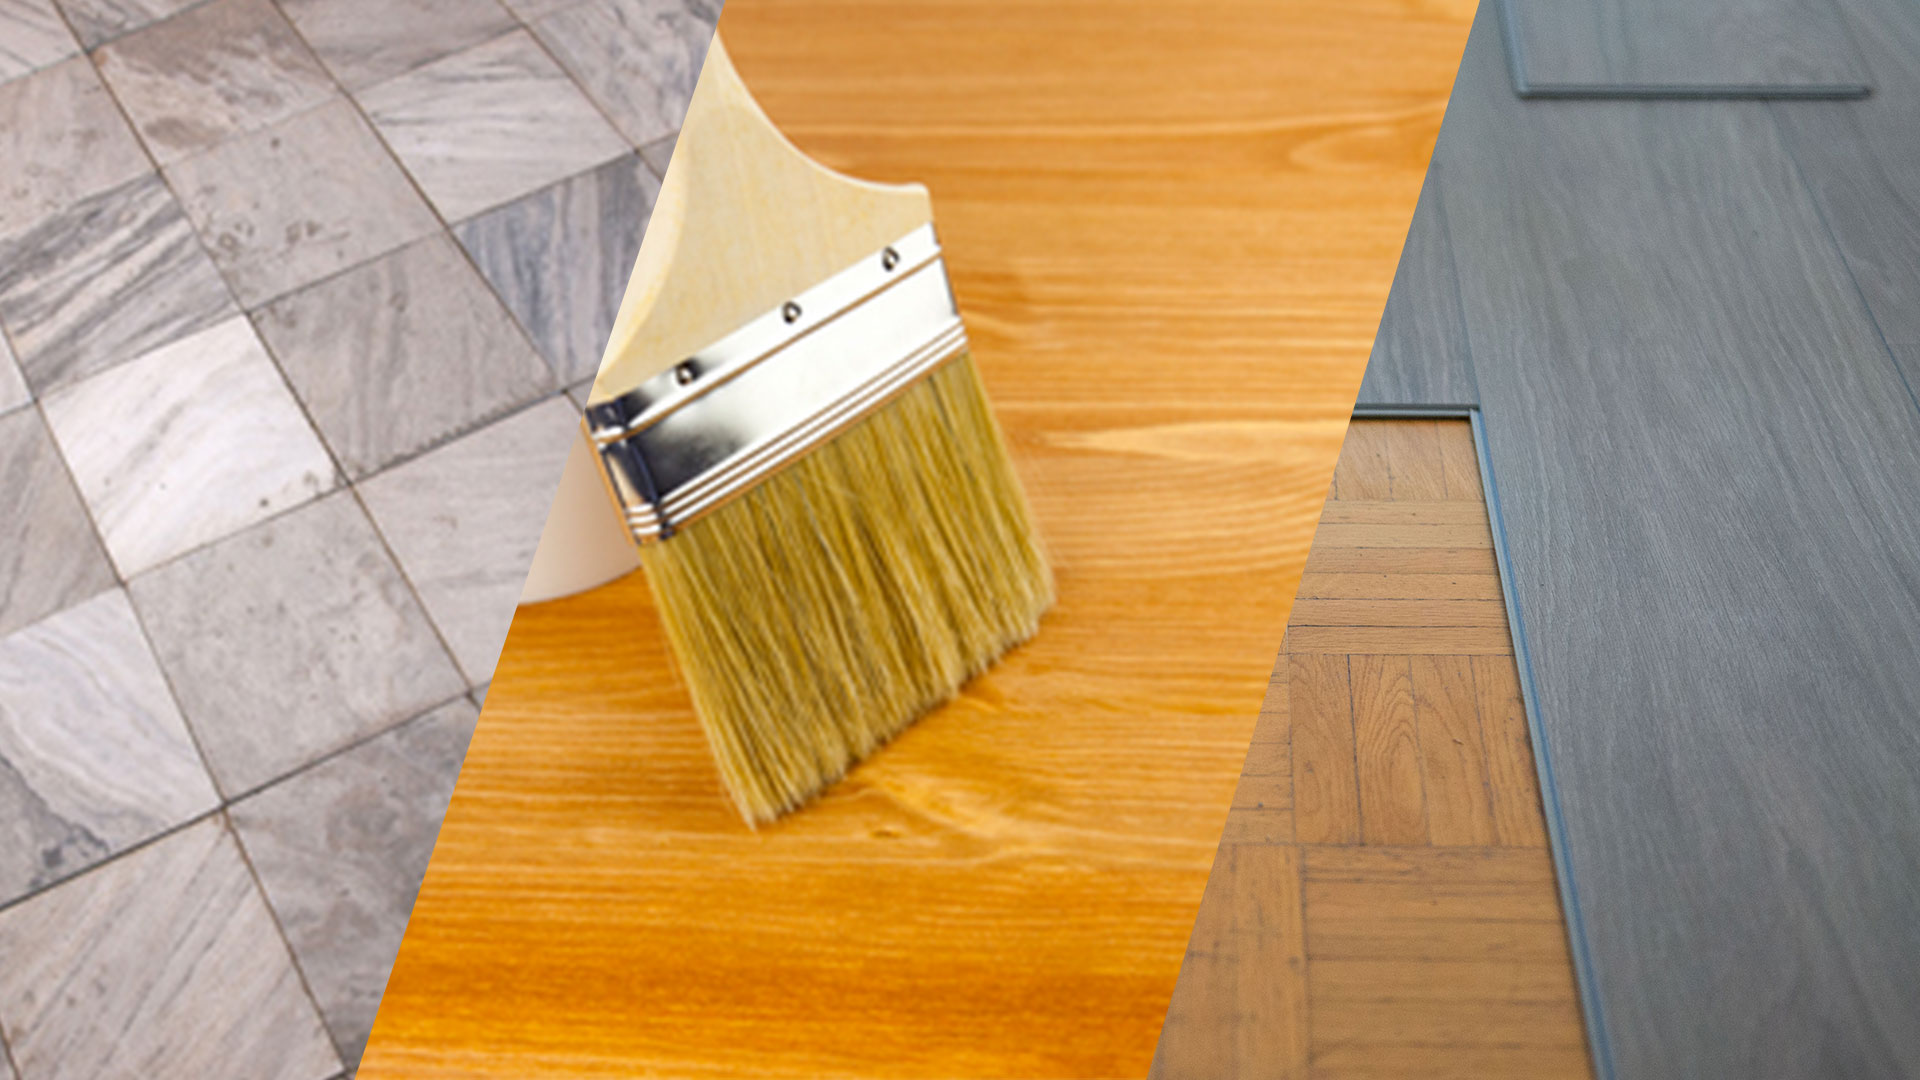 WHAT TYPE OF FLOORING IS BEST FOR YOU?